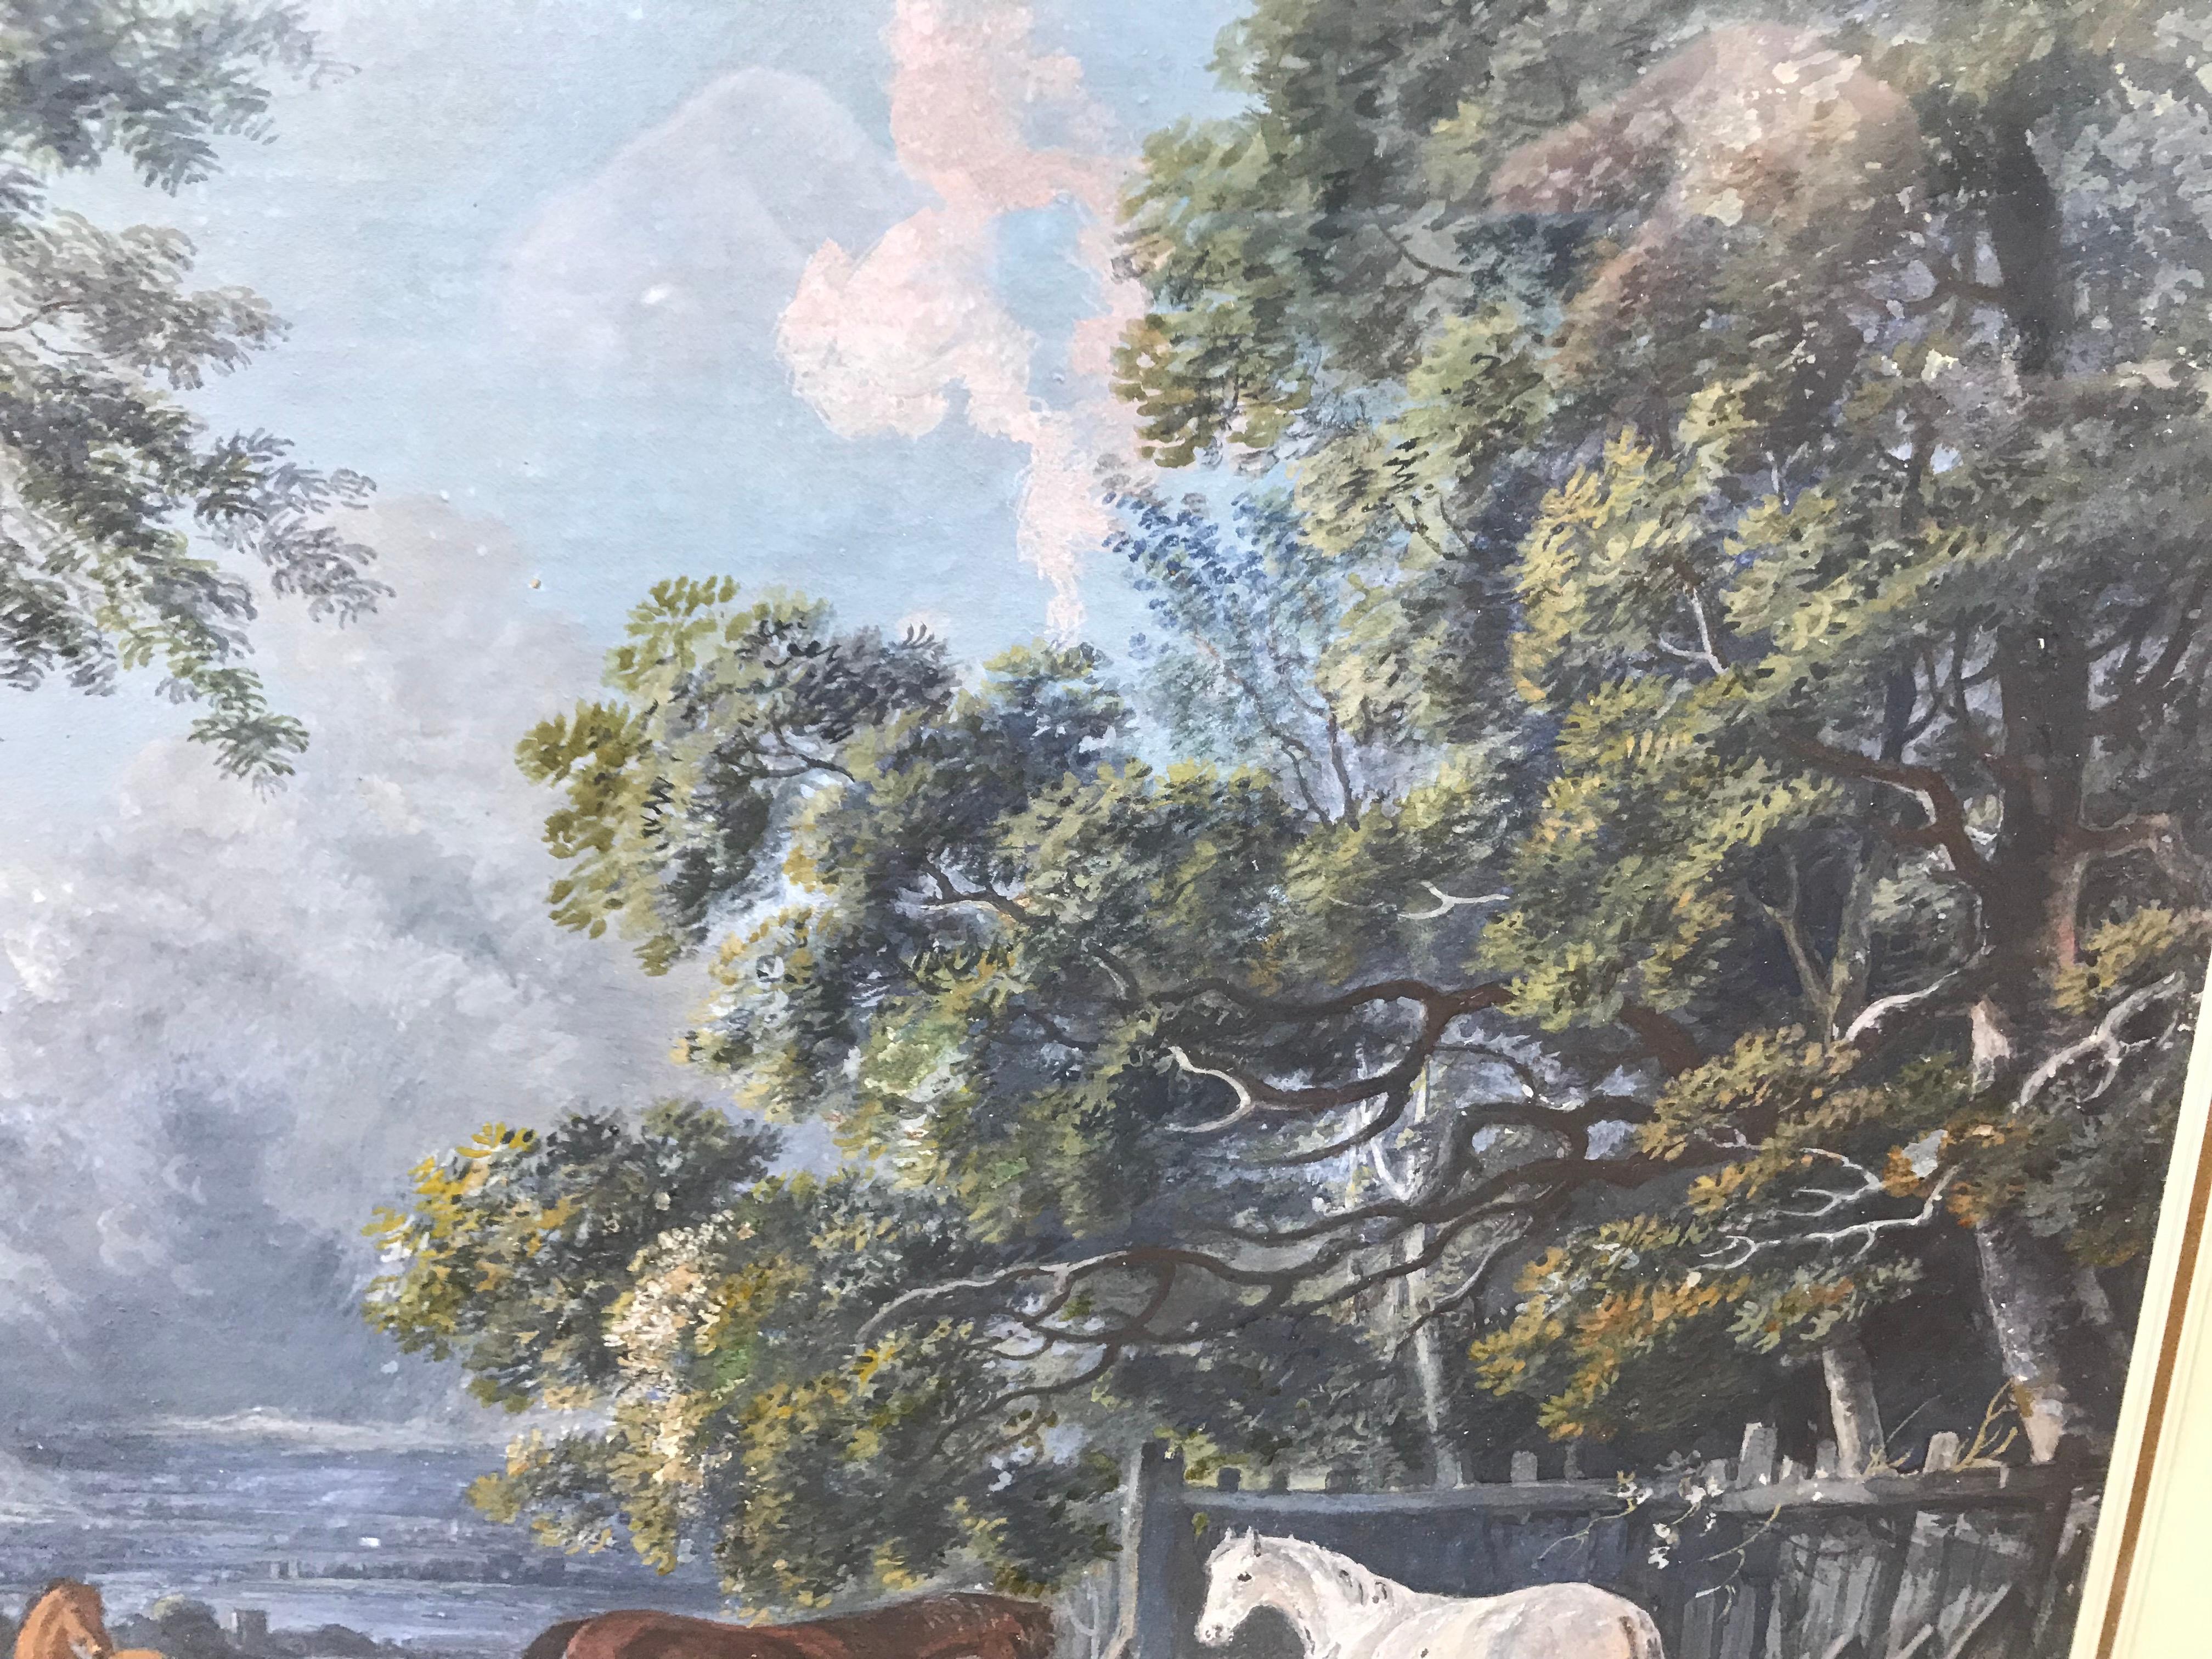 George Barret
c.1728-1787
Mares and Foals
Watercolour and gouache on paper
24 x 31 cm
9 1/2 x 12 1/4 in